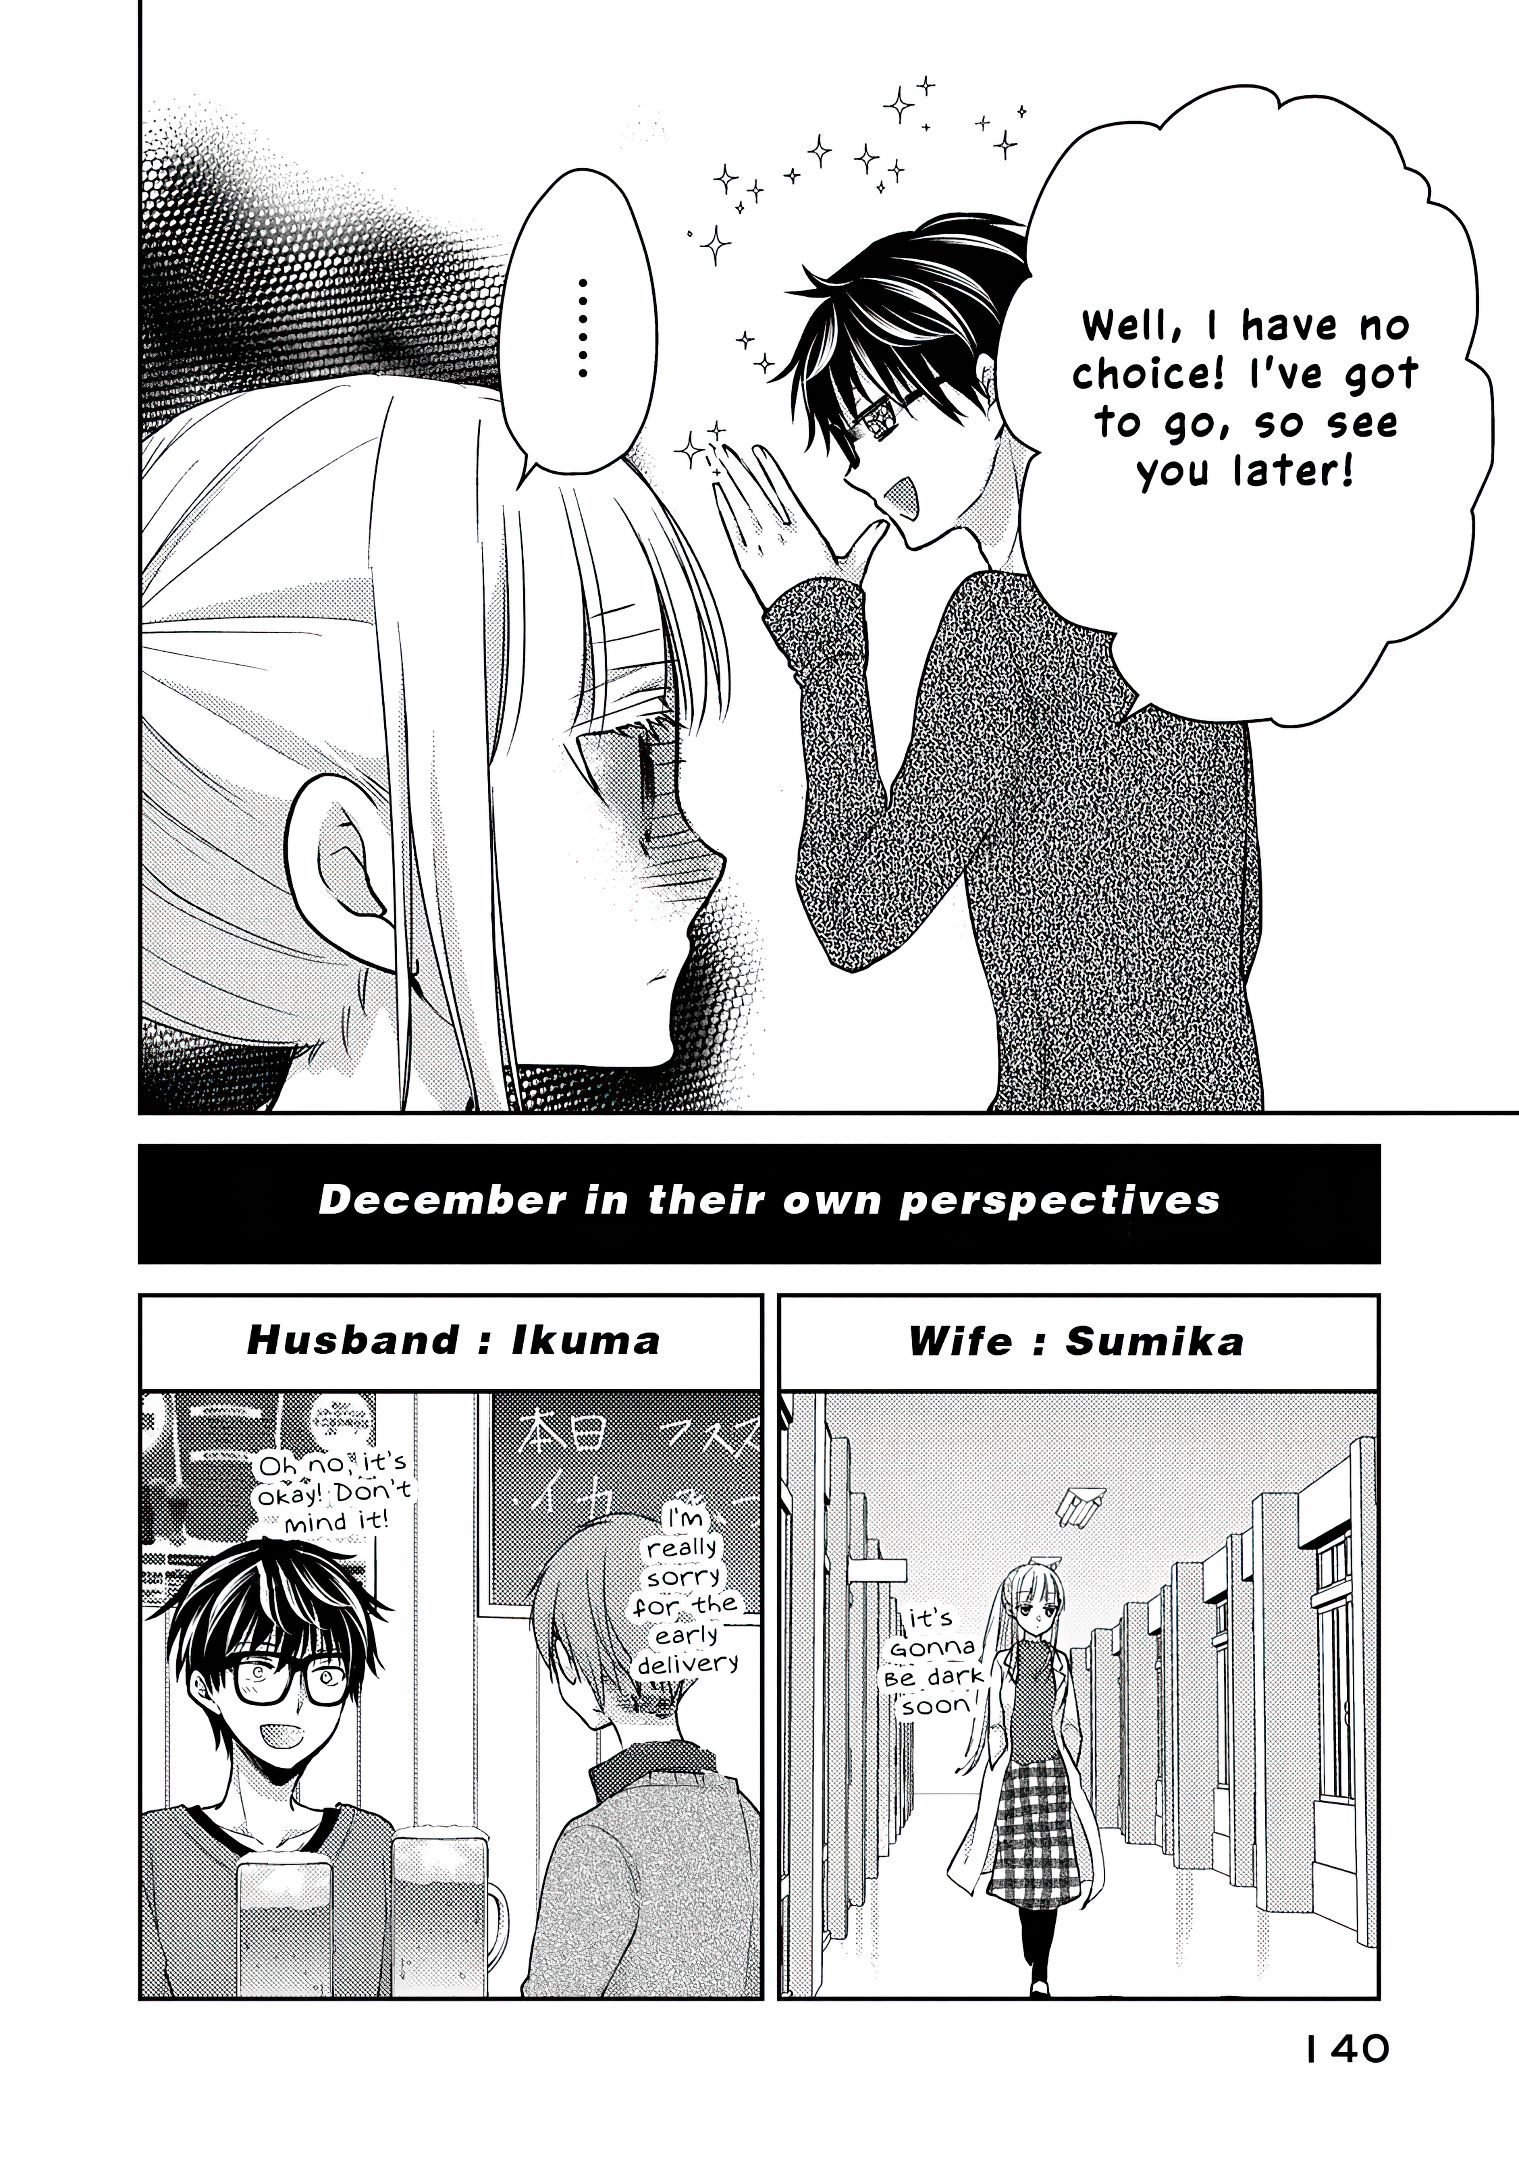 We May Be an Inexperienced Couple but... chapter 69.1 page 3